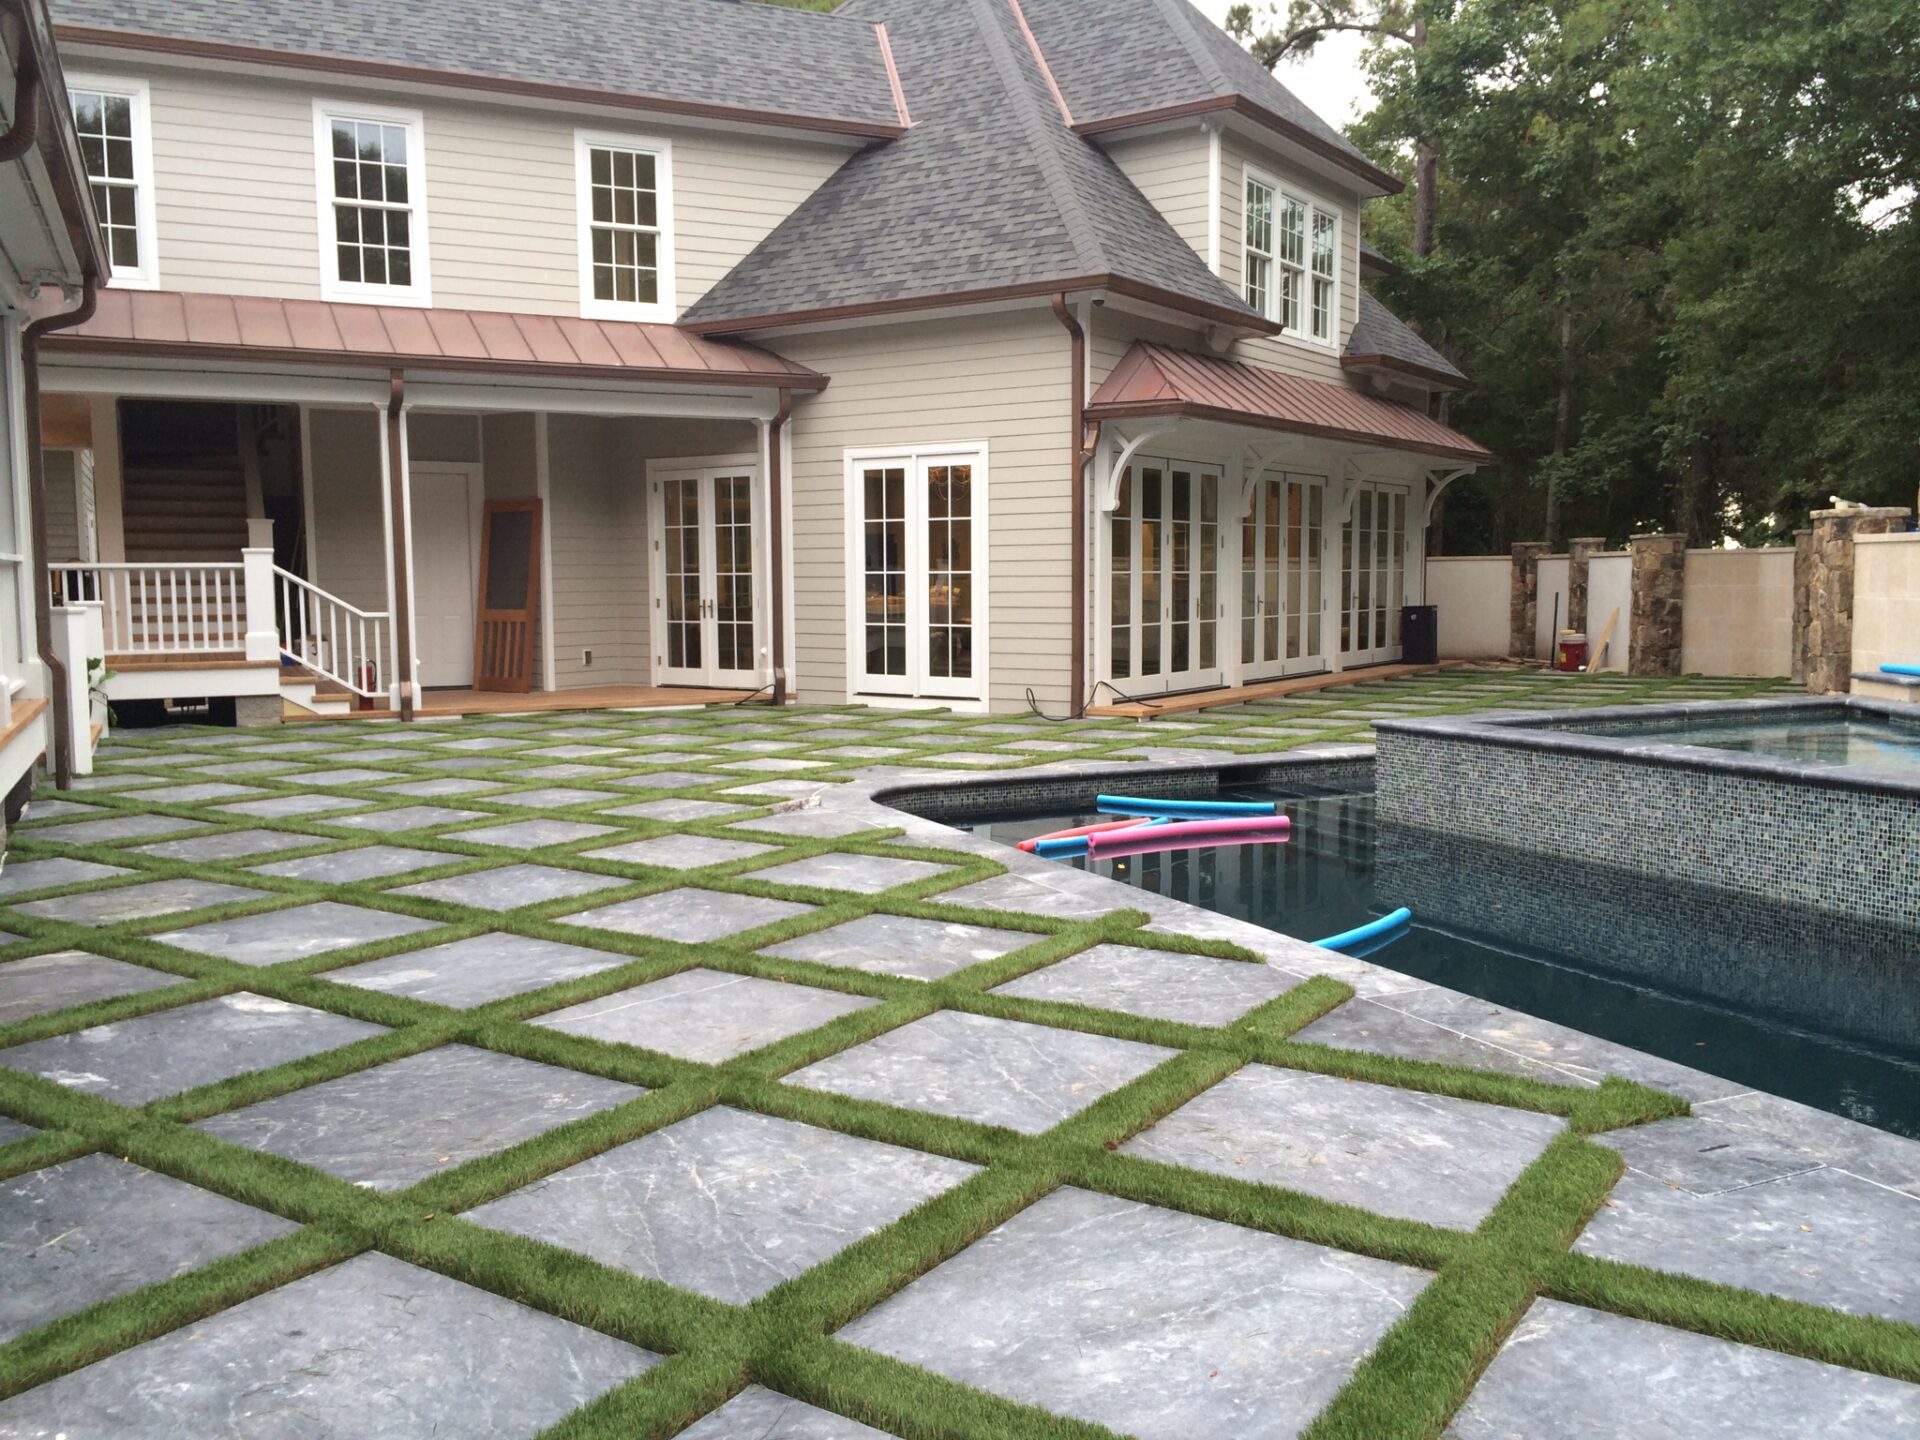 A large house with a slate tile patio and pool. The pool has floating foam noodles. There's grass between the patio tiles, and trees in the background.